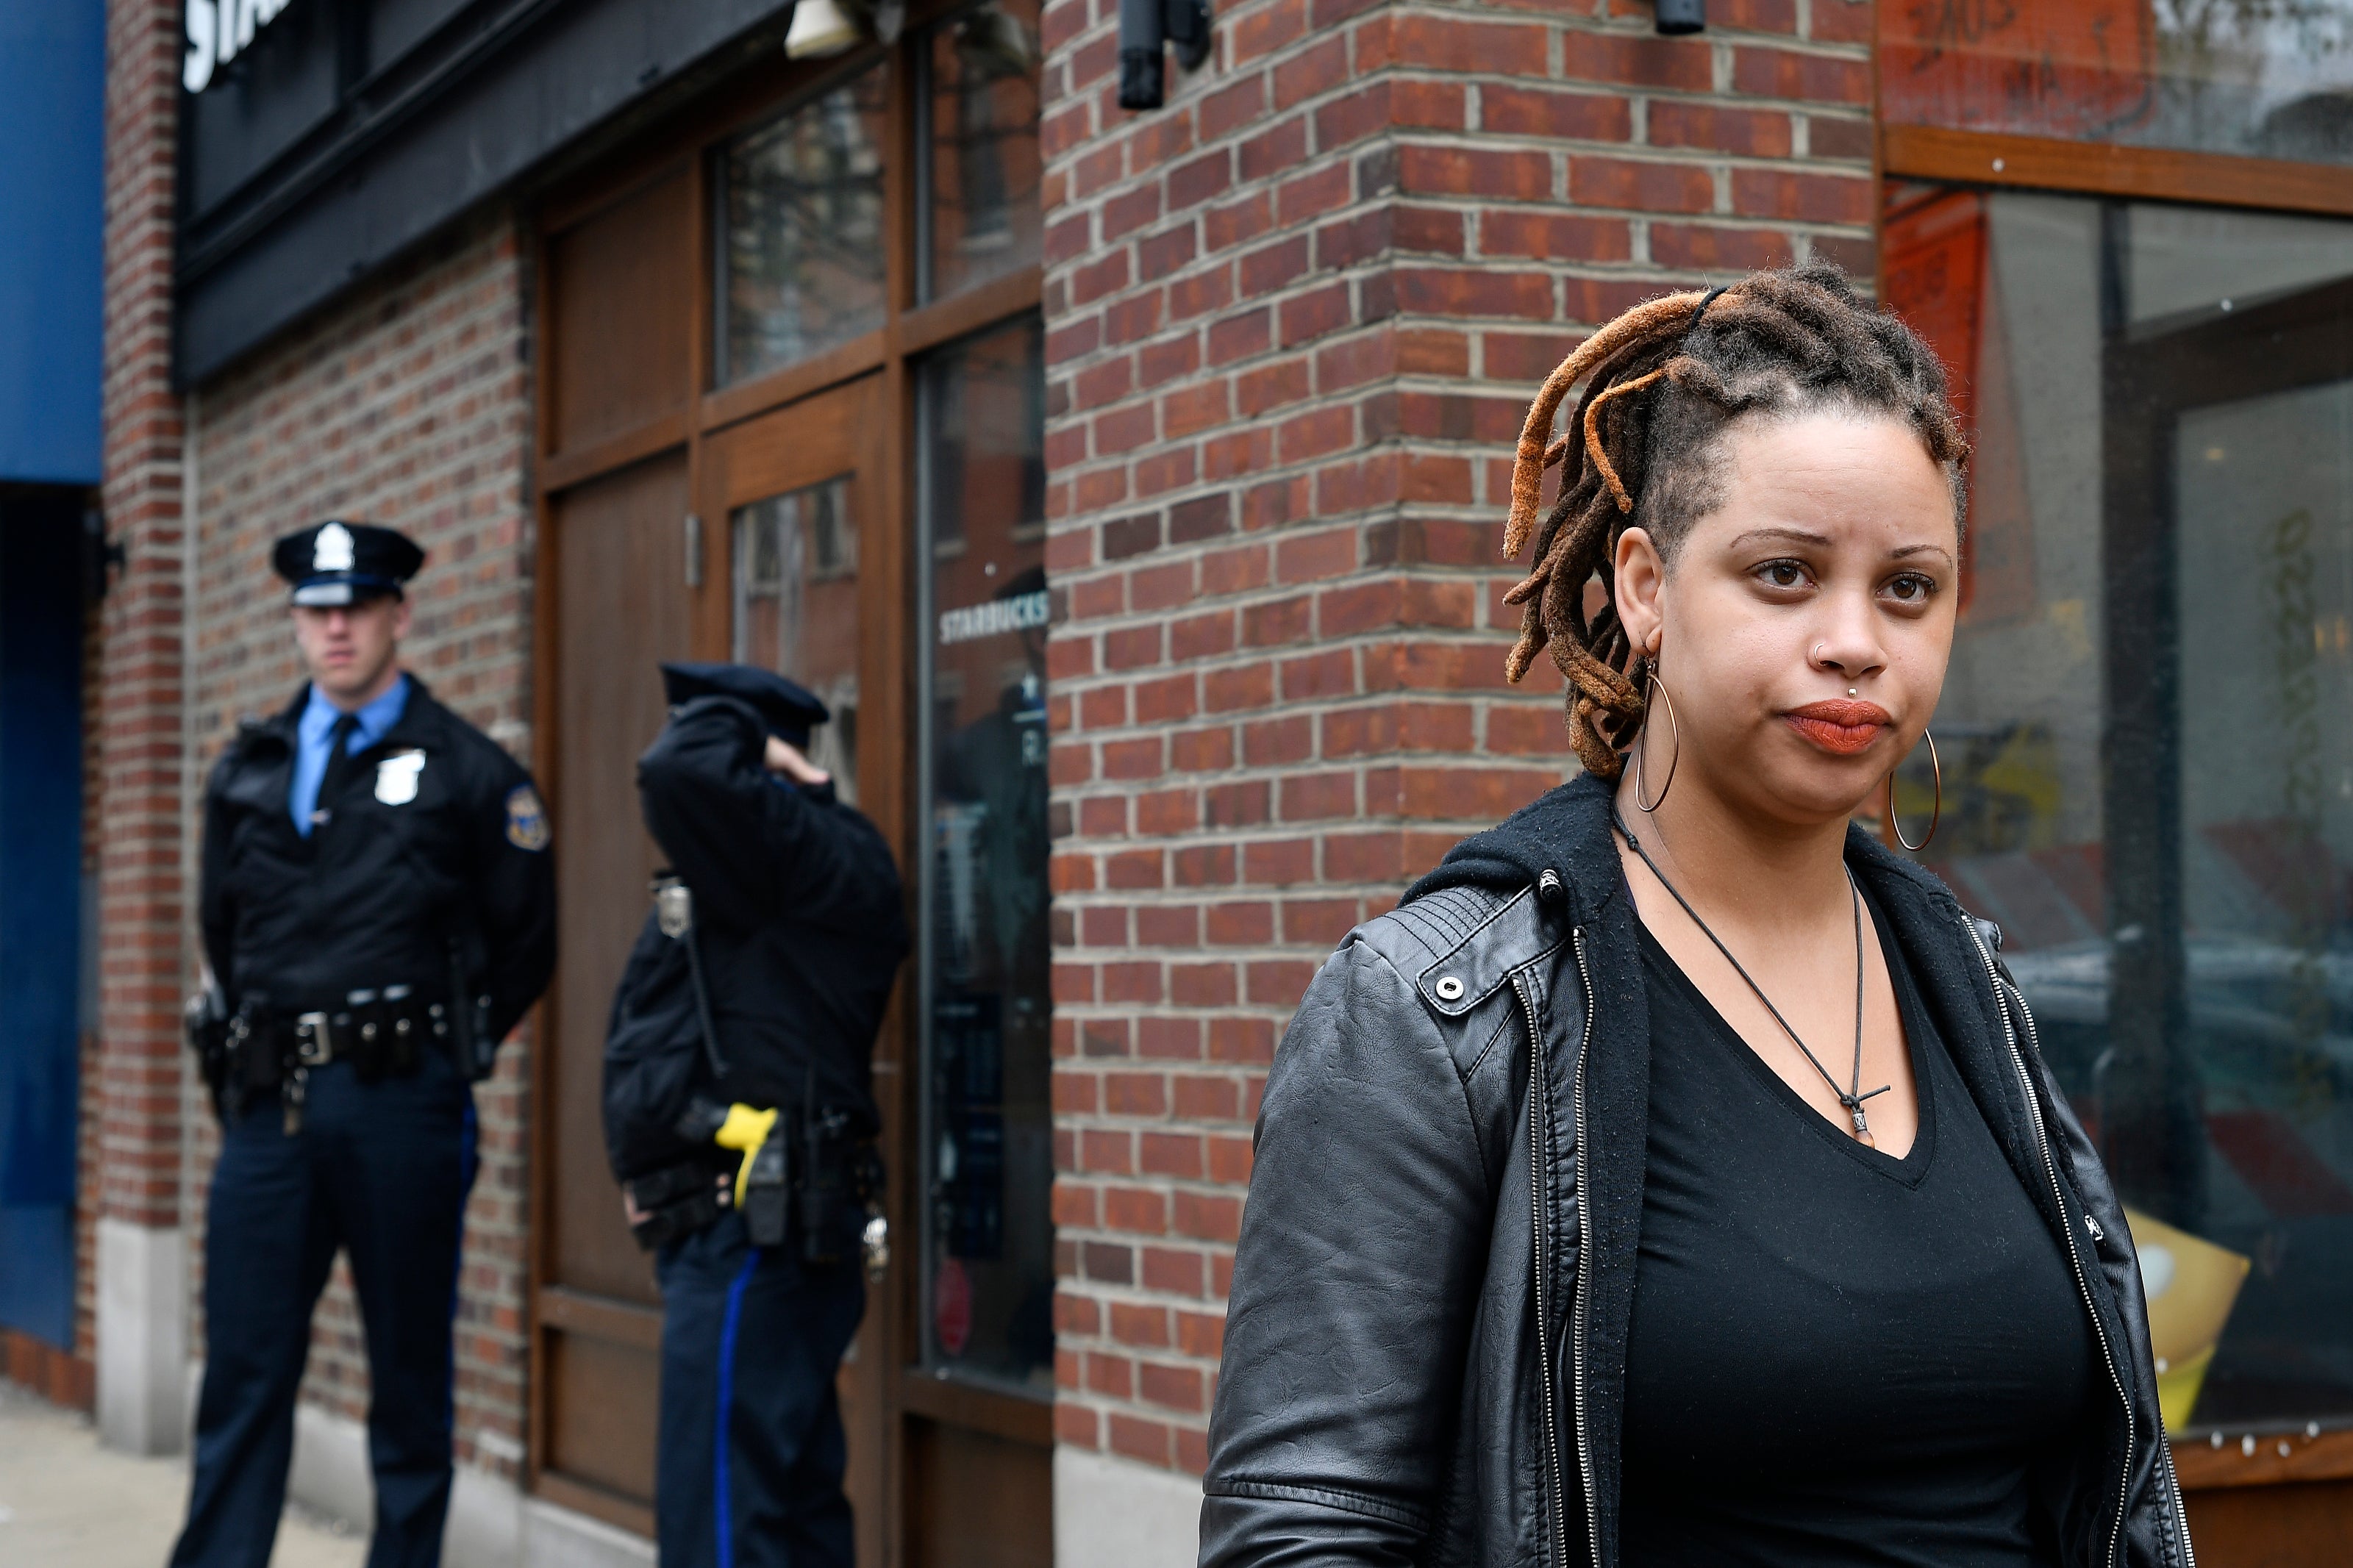 Shani Akilah Robin was one of an estimated 50 people protesting the controversial arrest of two black Starbucks patrons at the chain's Rittenhouse location on April 16. (Bastiaan Slabbers/For WHYY)